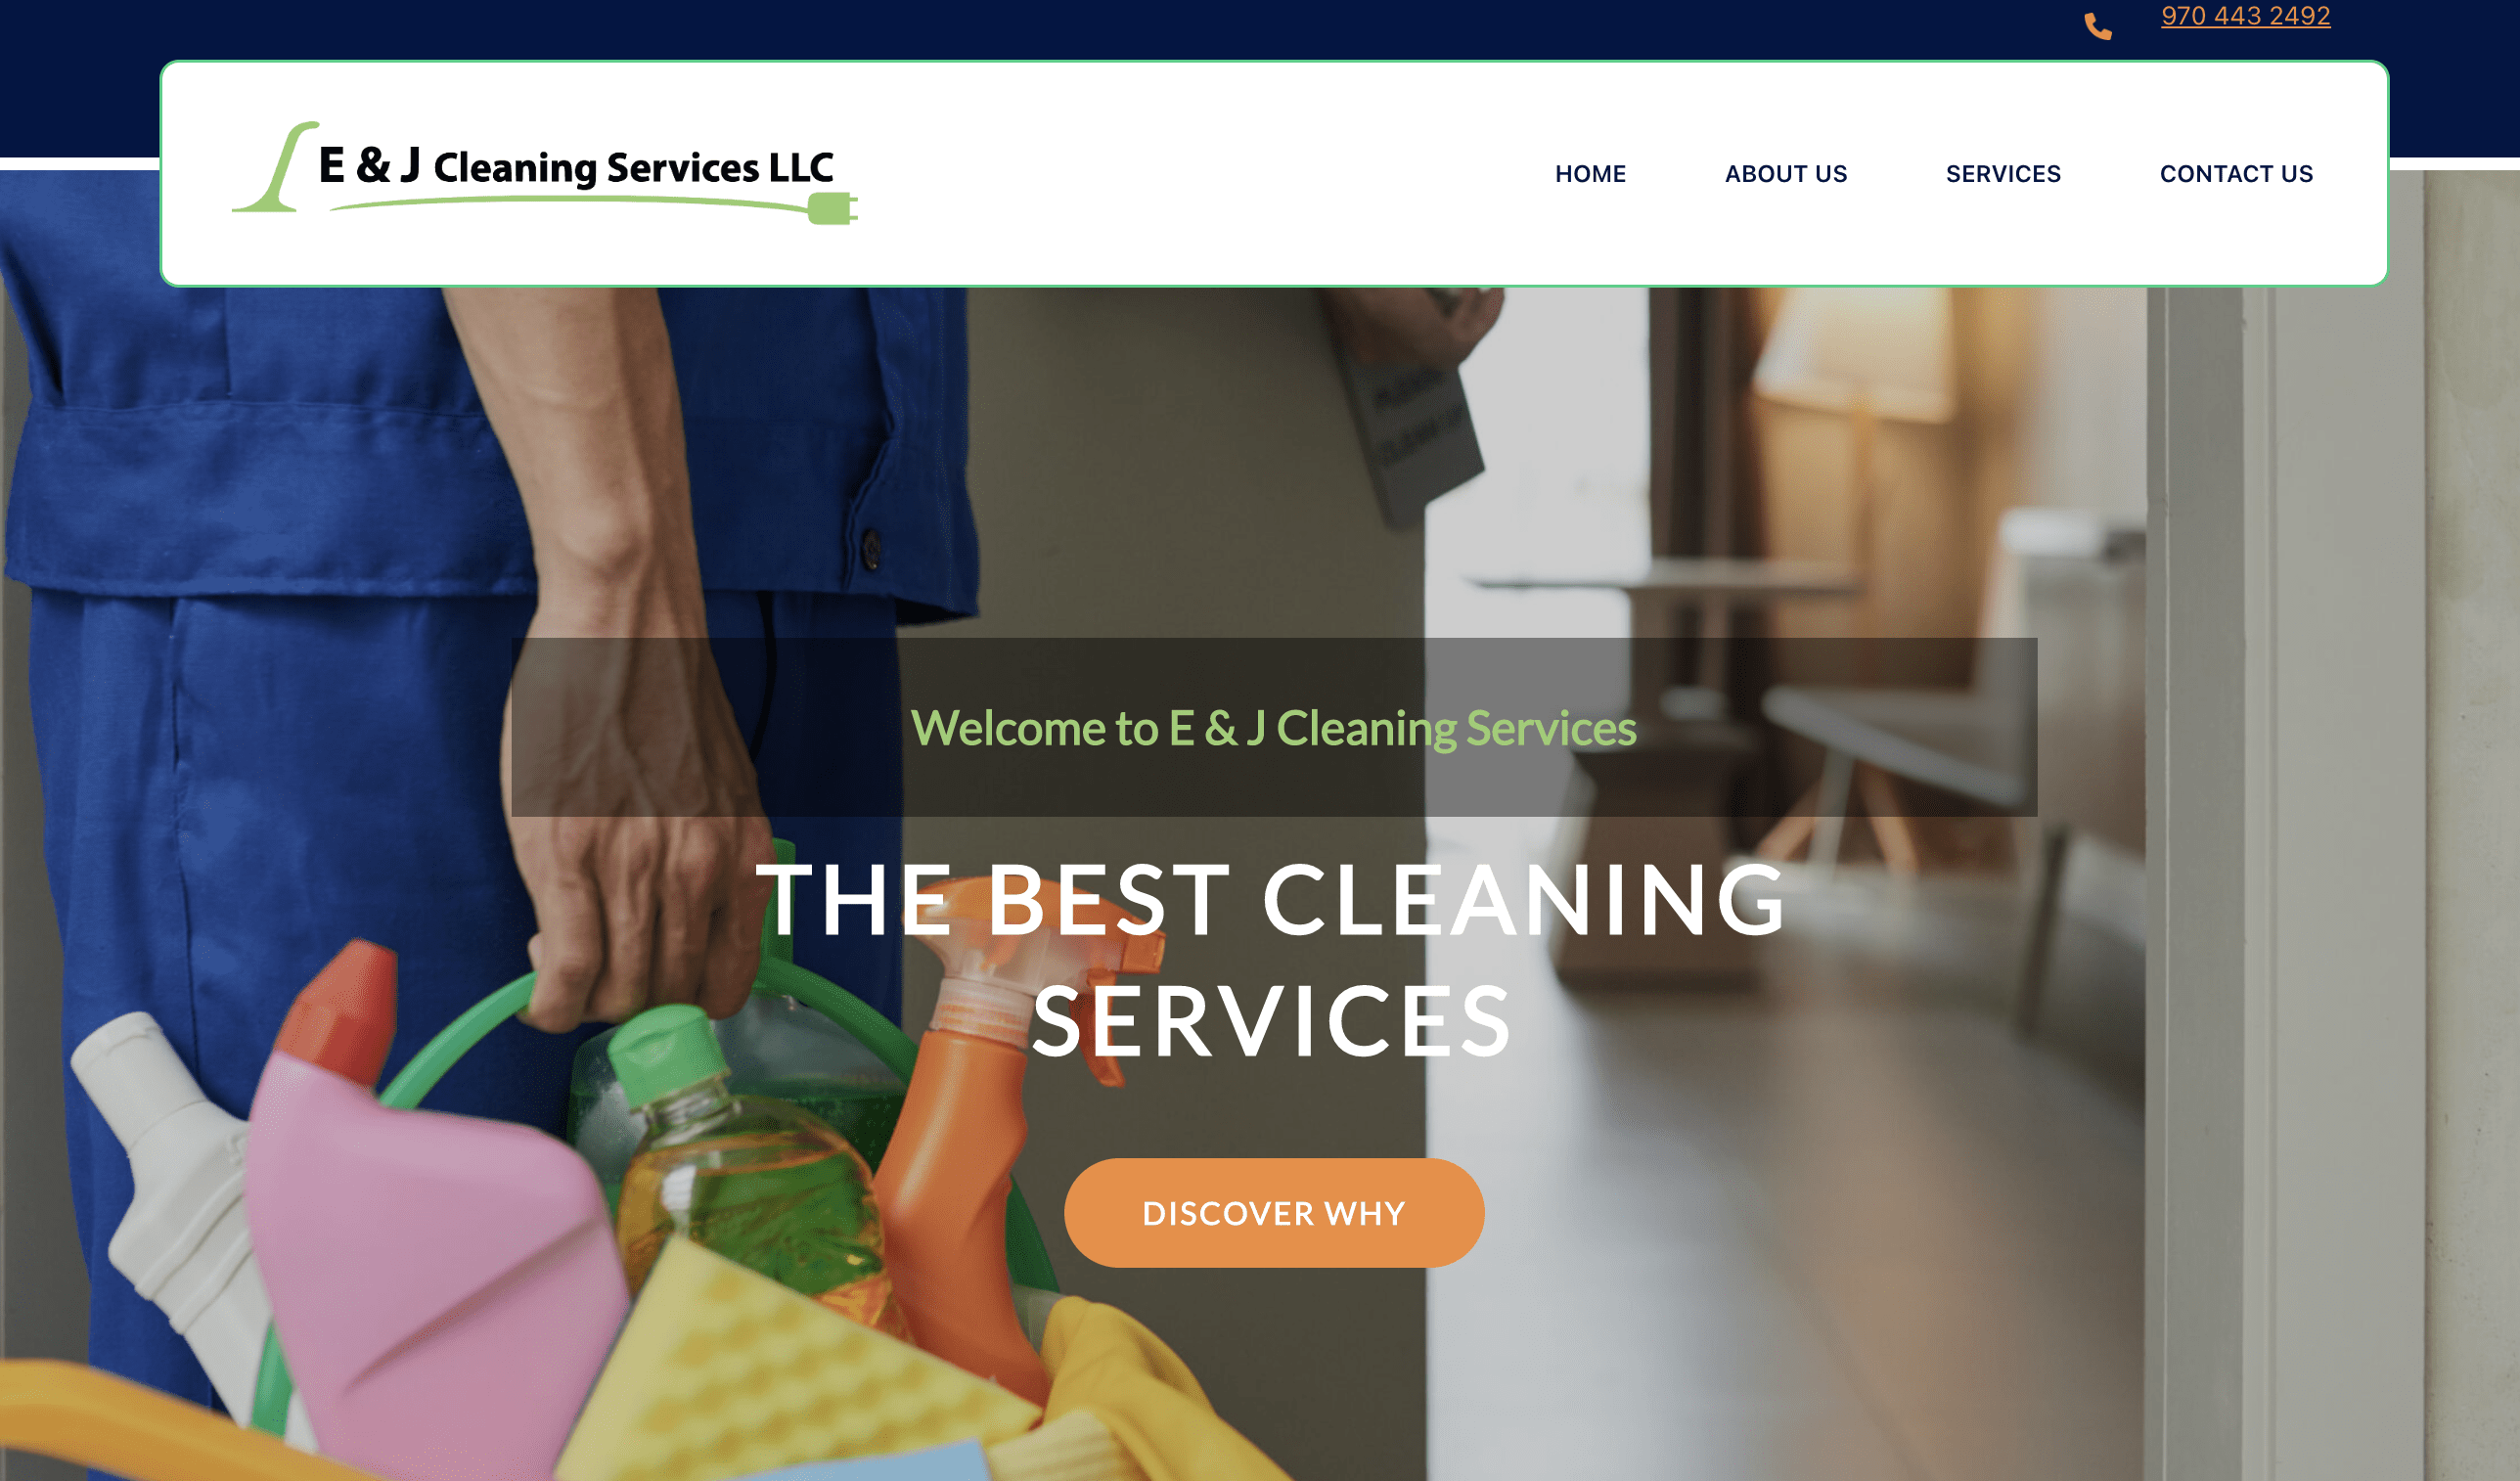 E&J Cleaning Services